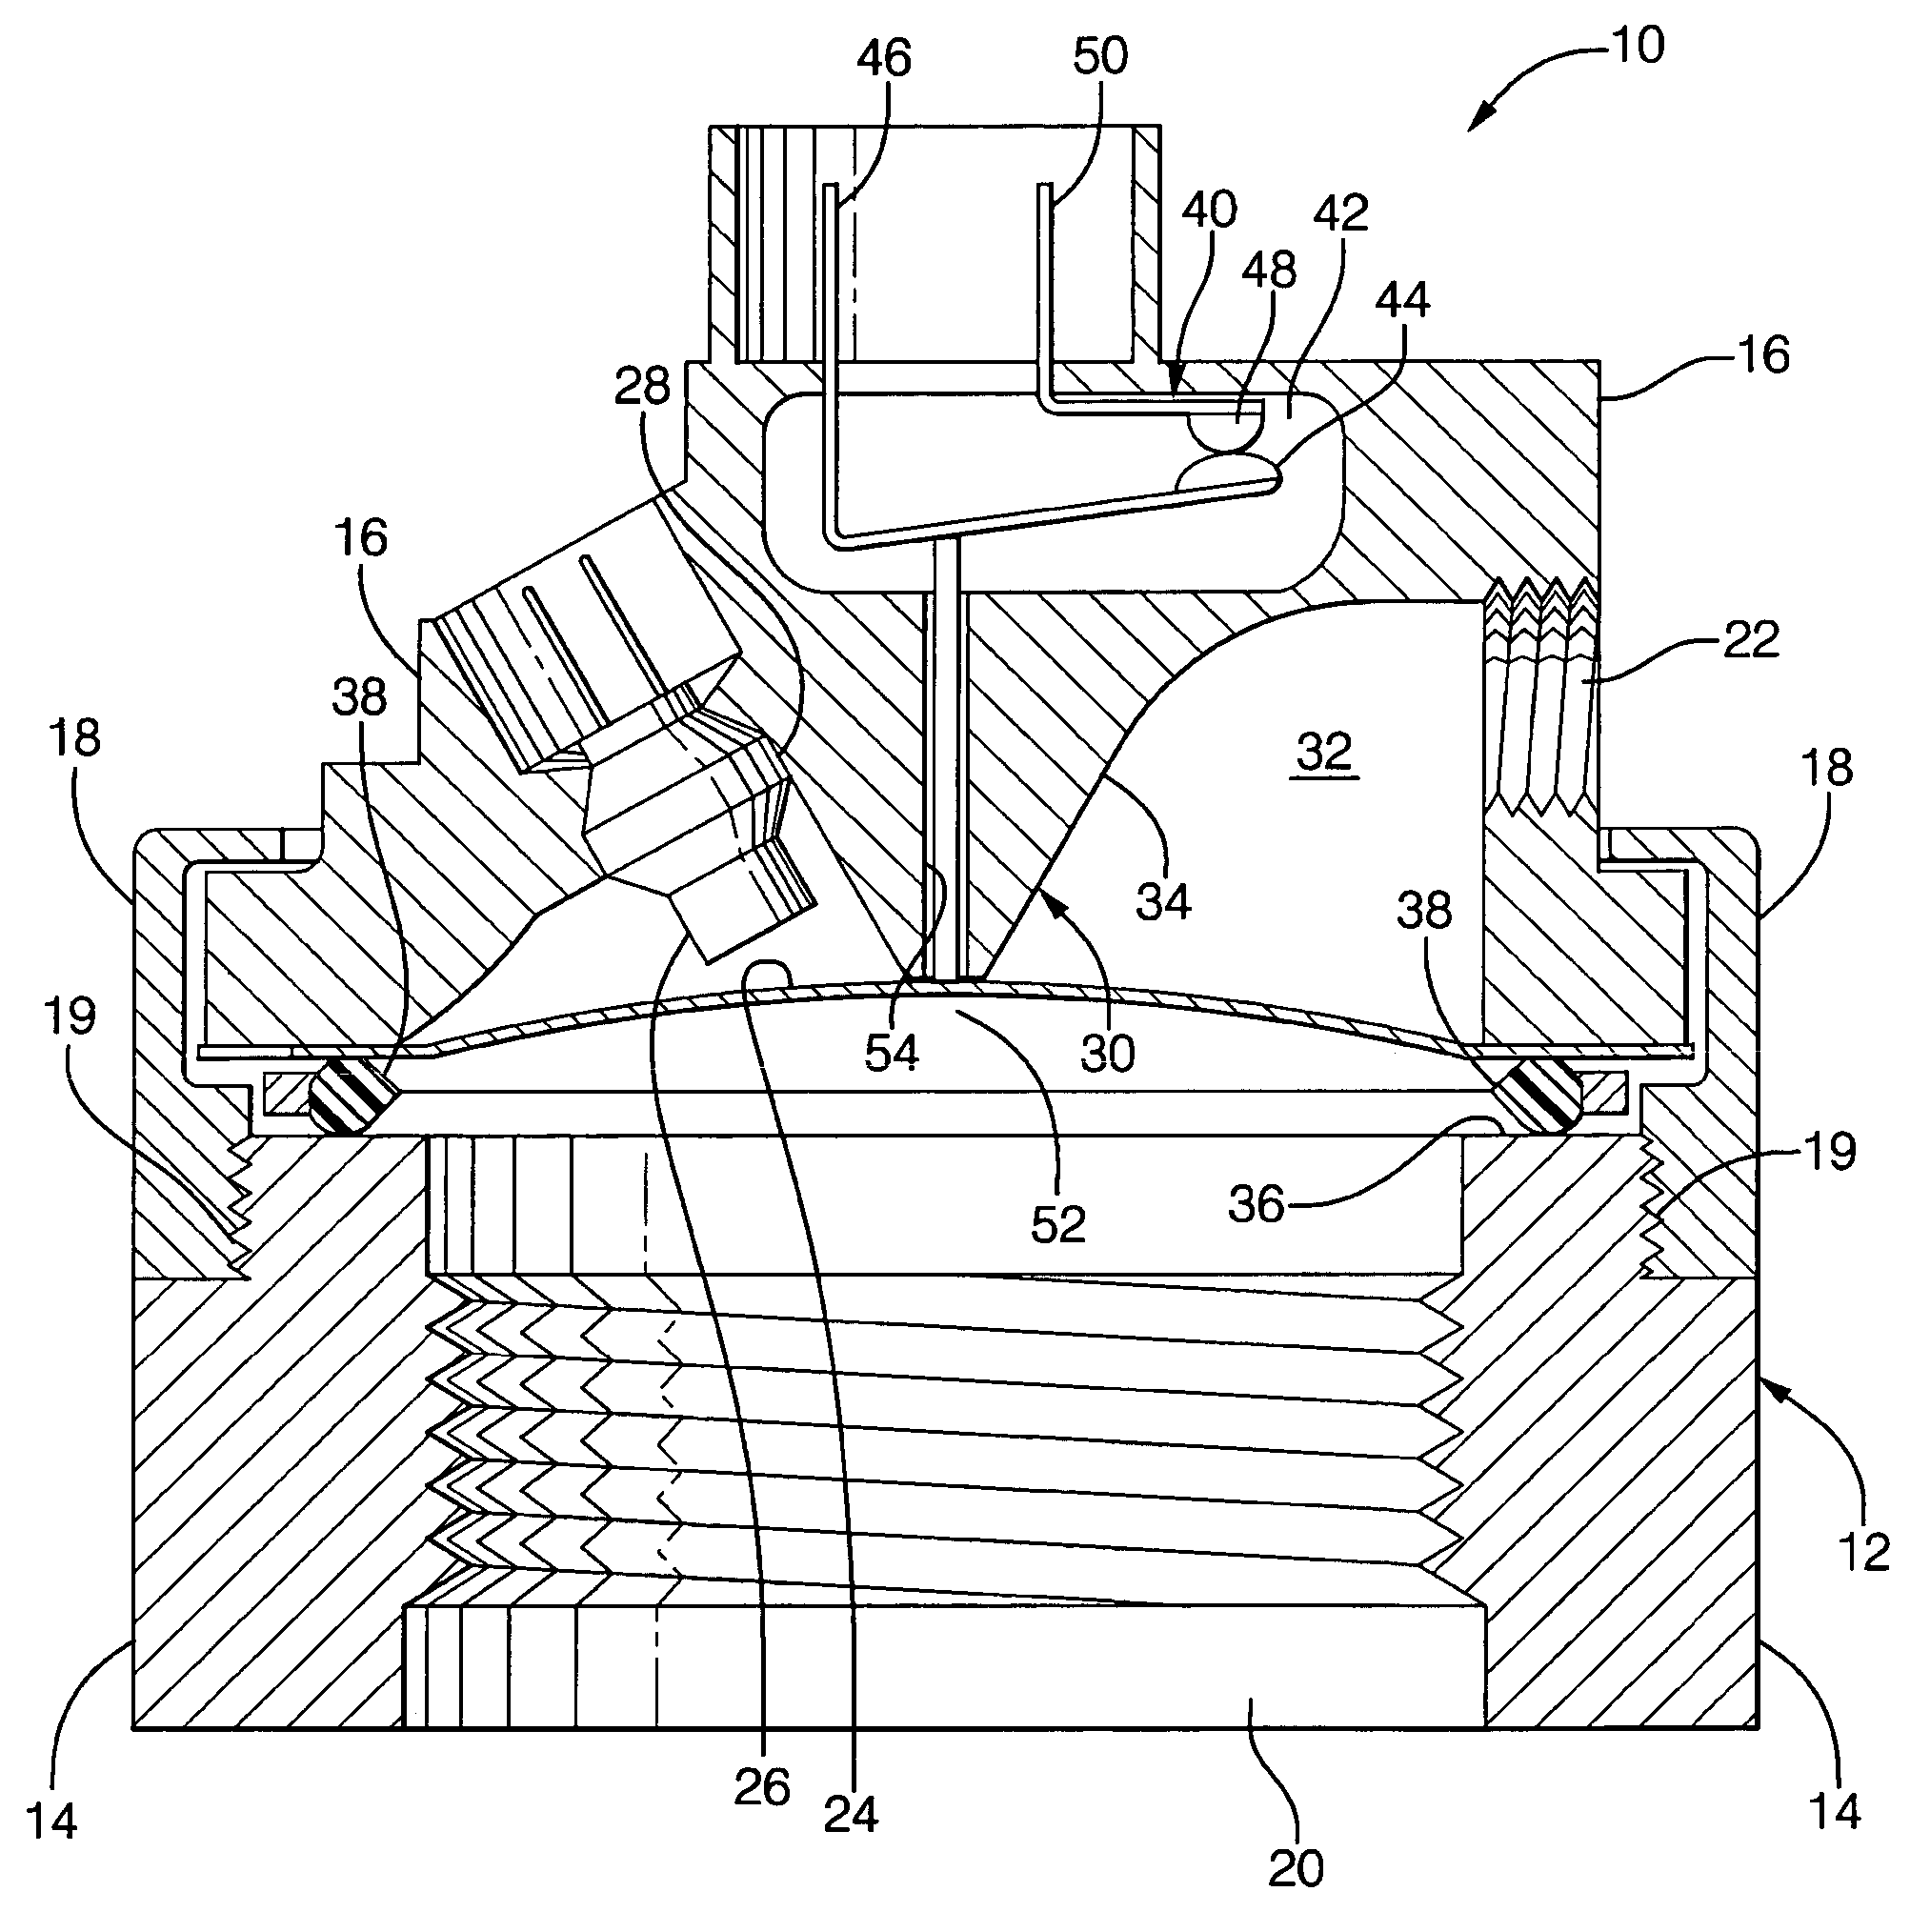 Blowoff valve assembly with integrated pressure switch